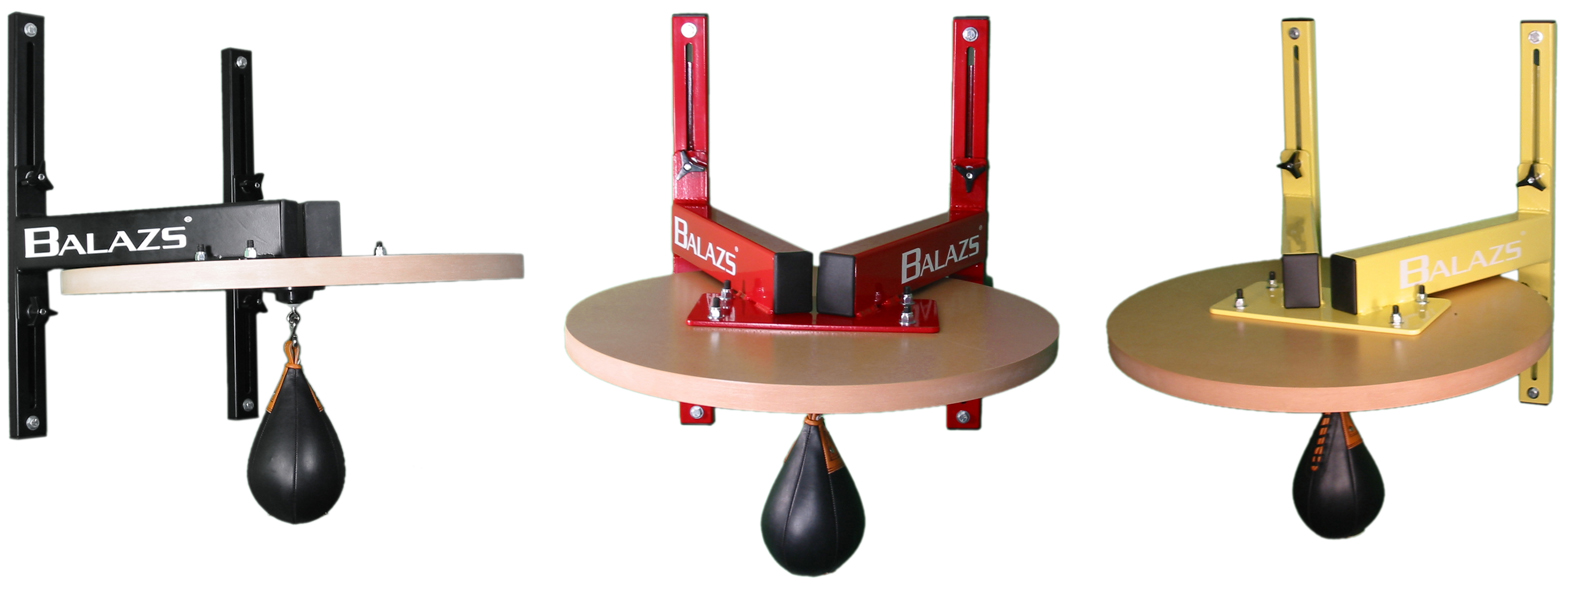 Balazs Introduces the i-Box Speed Bag Platform for Home Gyms; Sleek Styling and New color ...